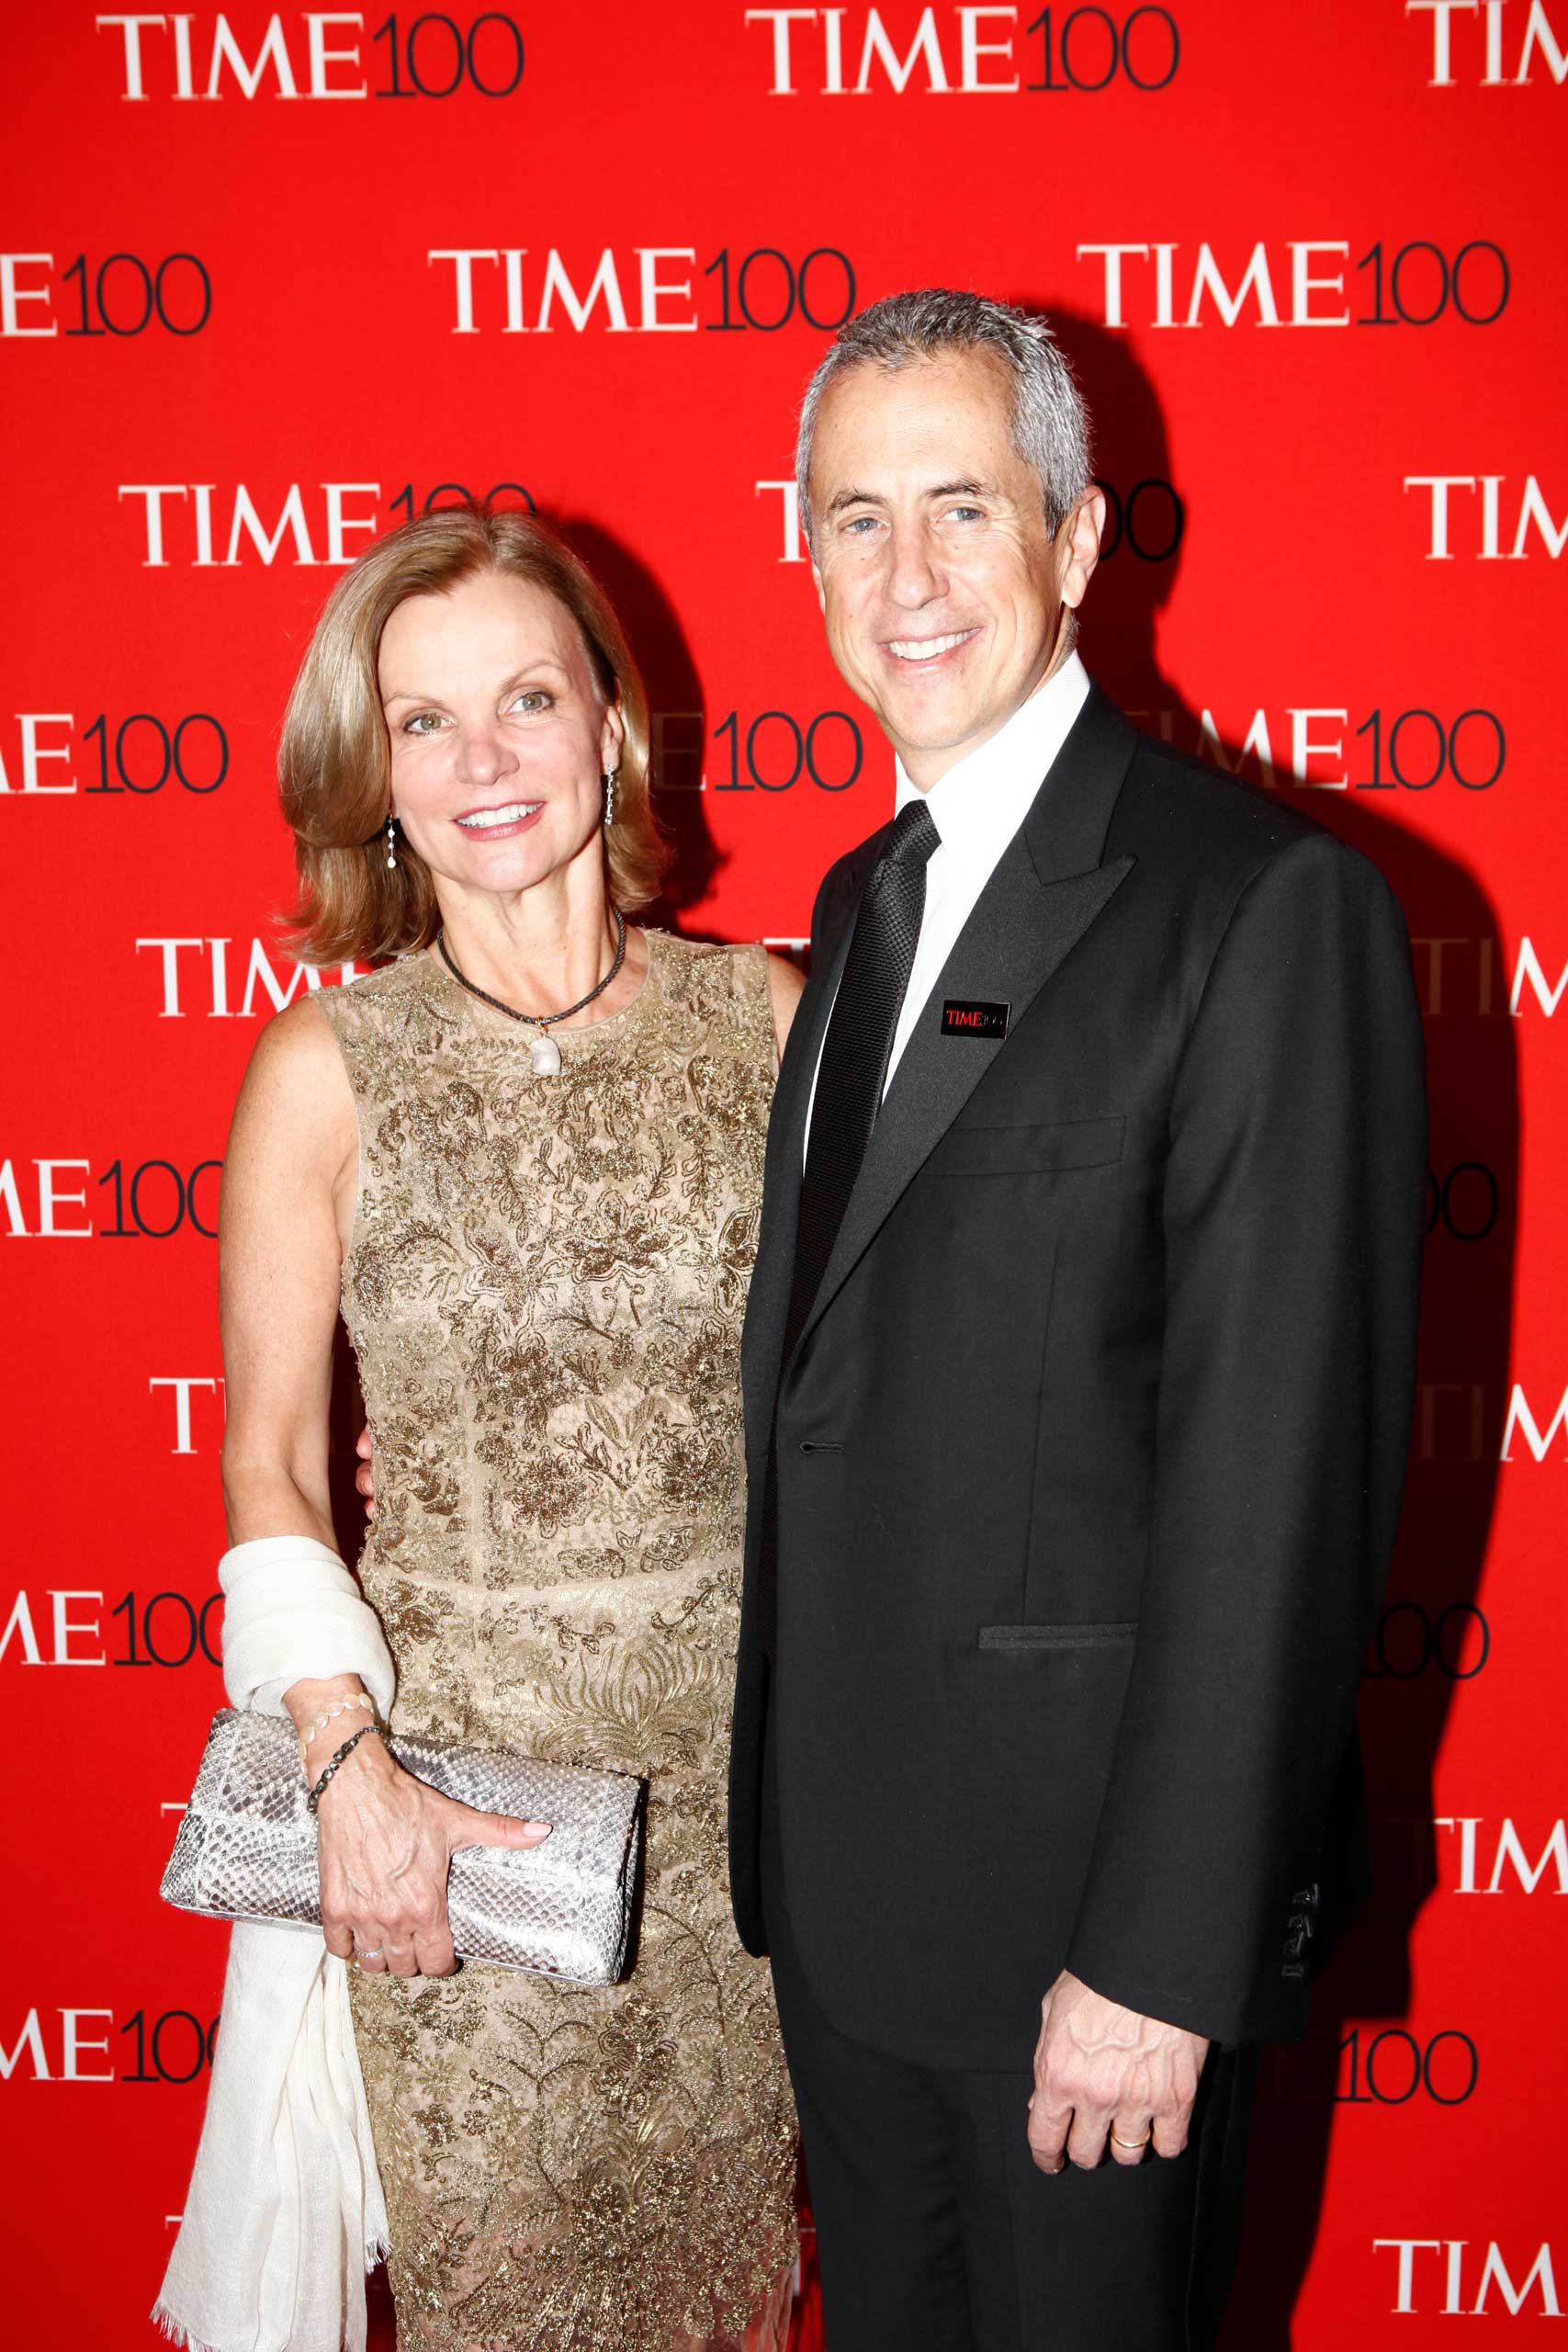 Danny Meyer and Audrey Meyer attend the TIME 100 Gala at Lincoln Center in New York City on Apr. 21, 2015.